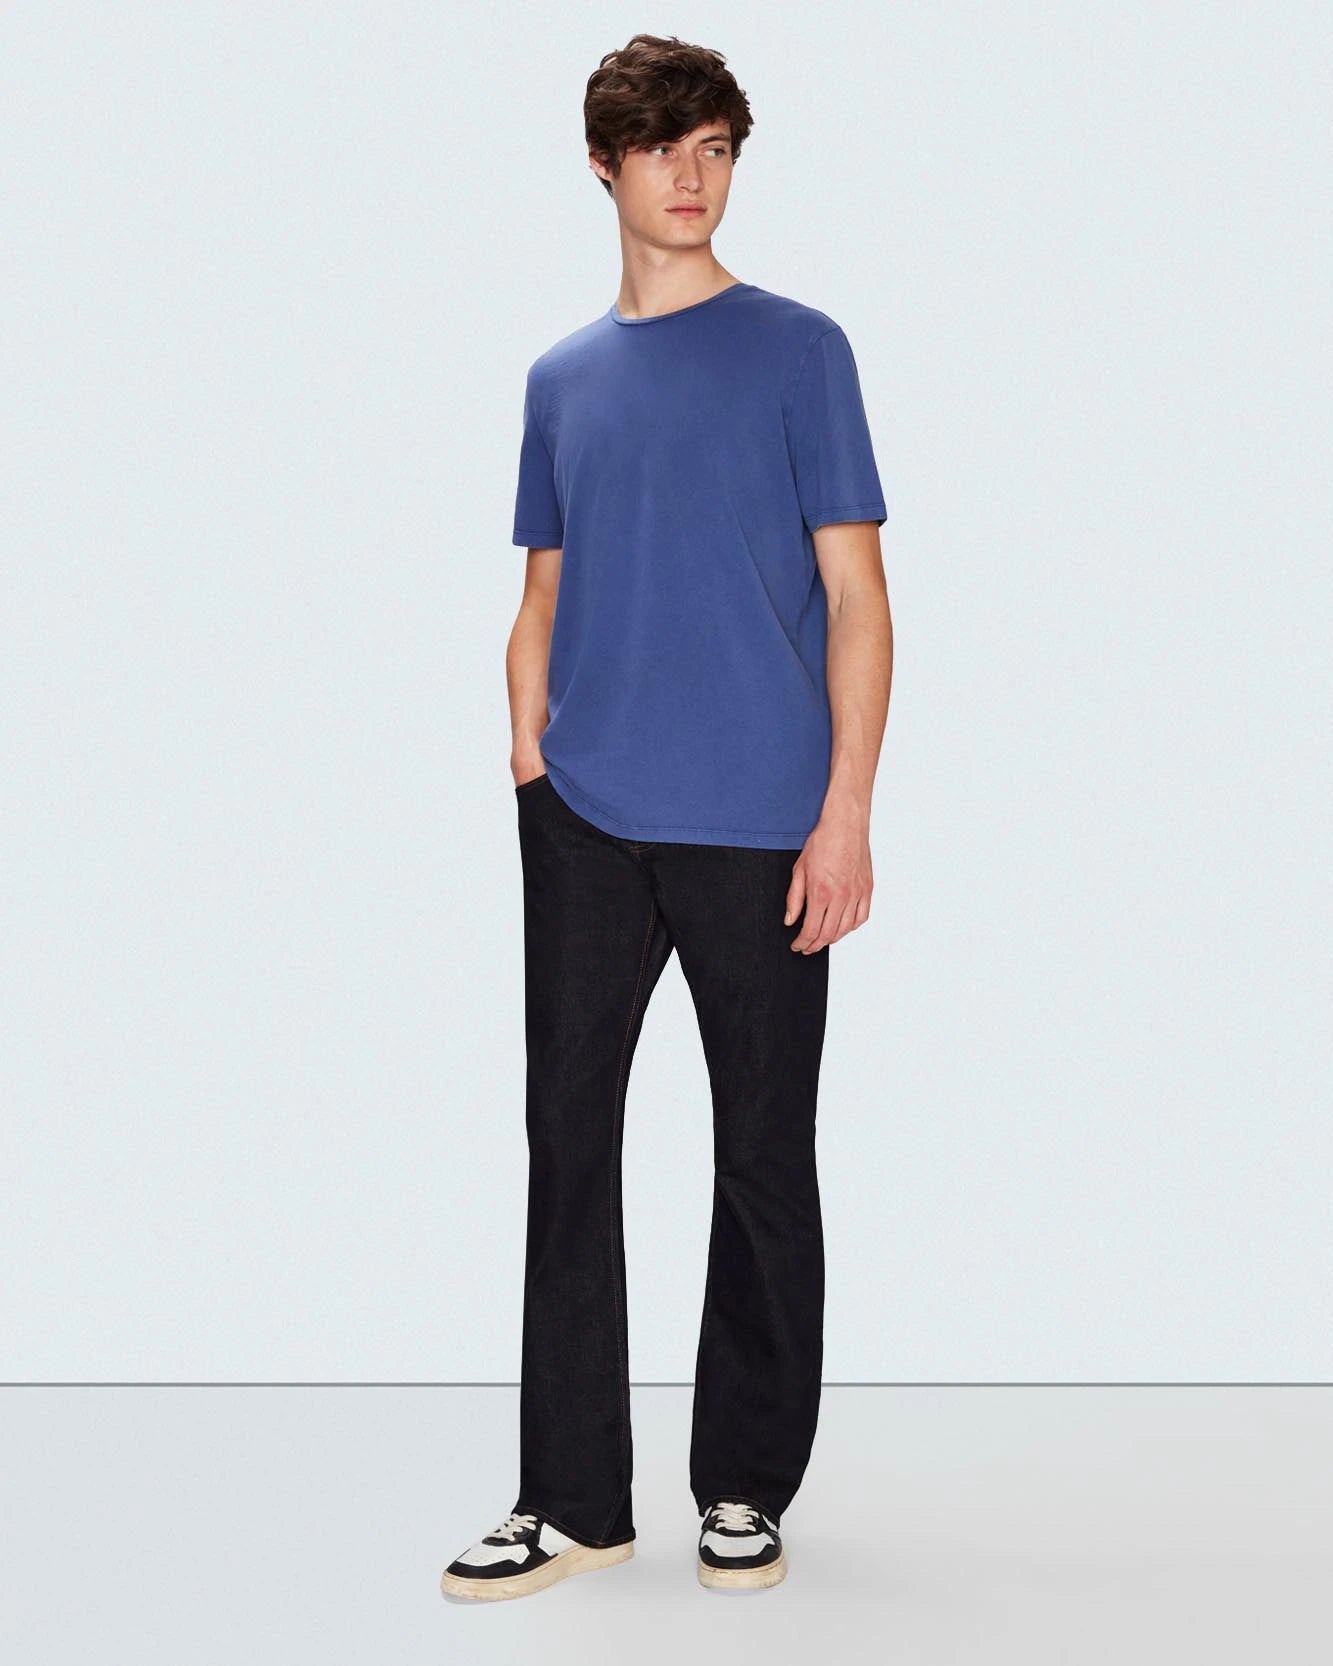 Luxe Performance Brett Bootcut in Super Rinse Blue | 7 For All Mankind